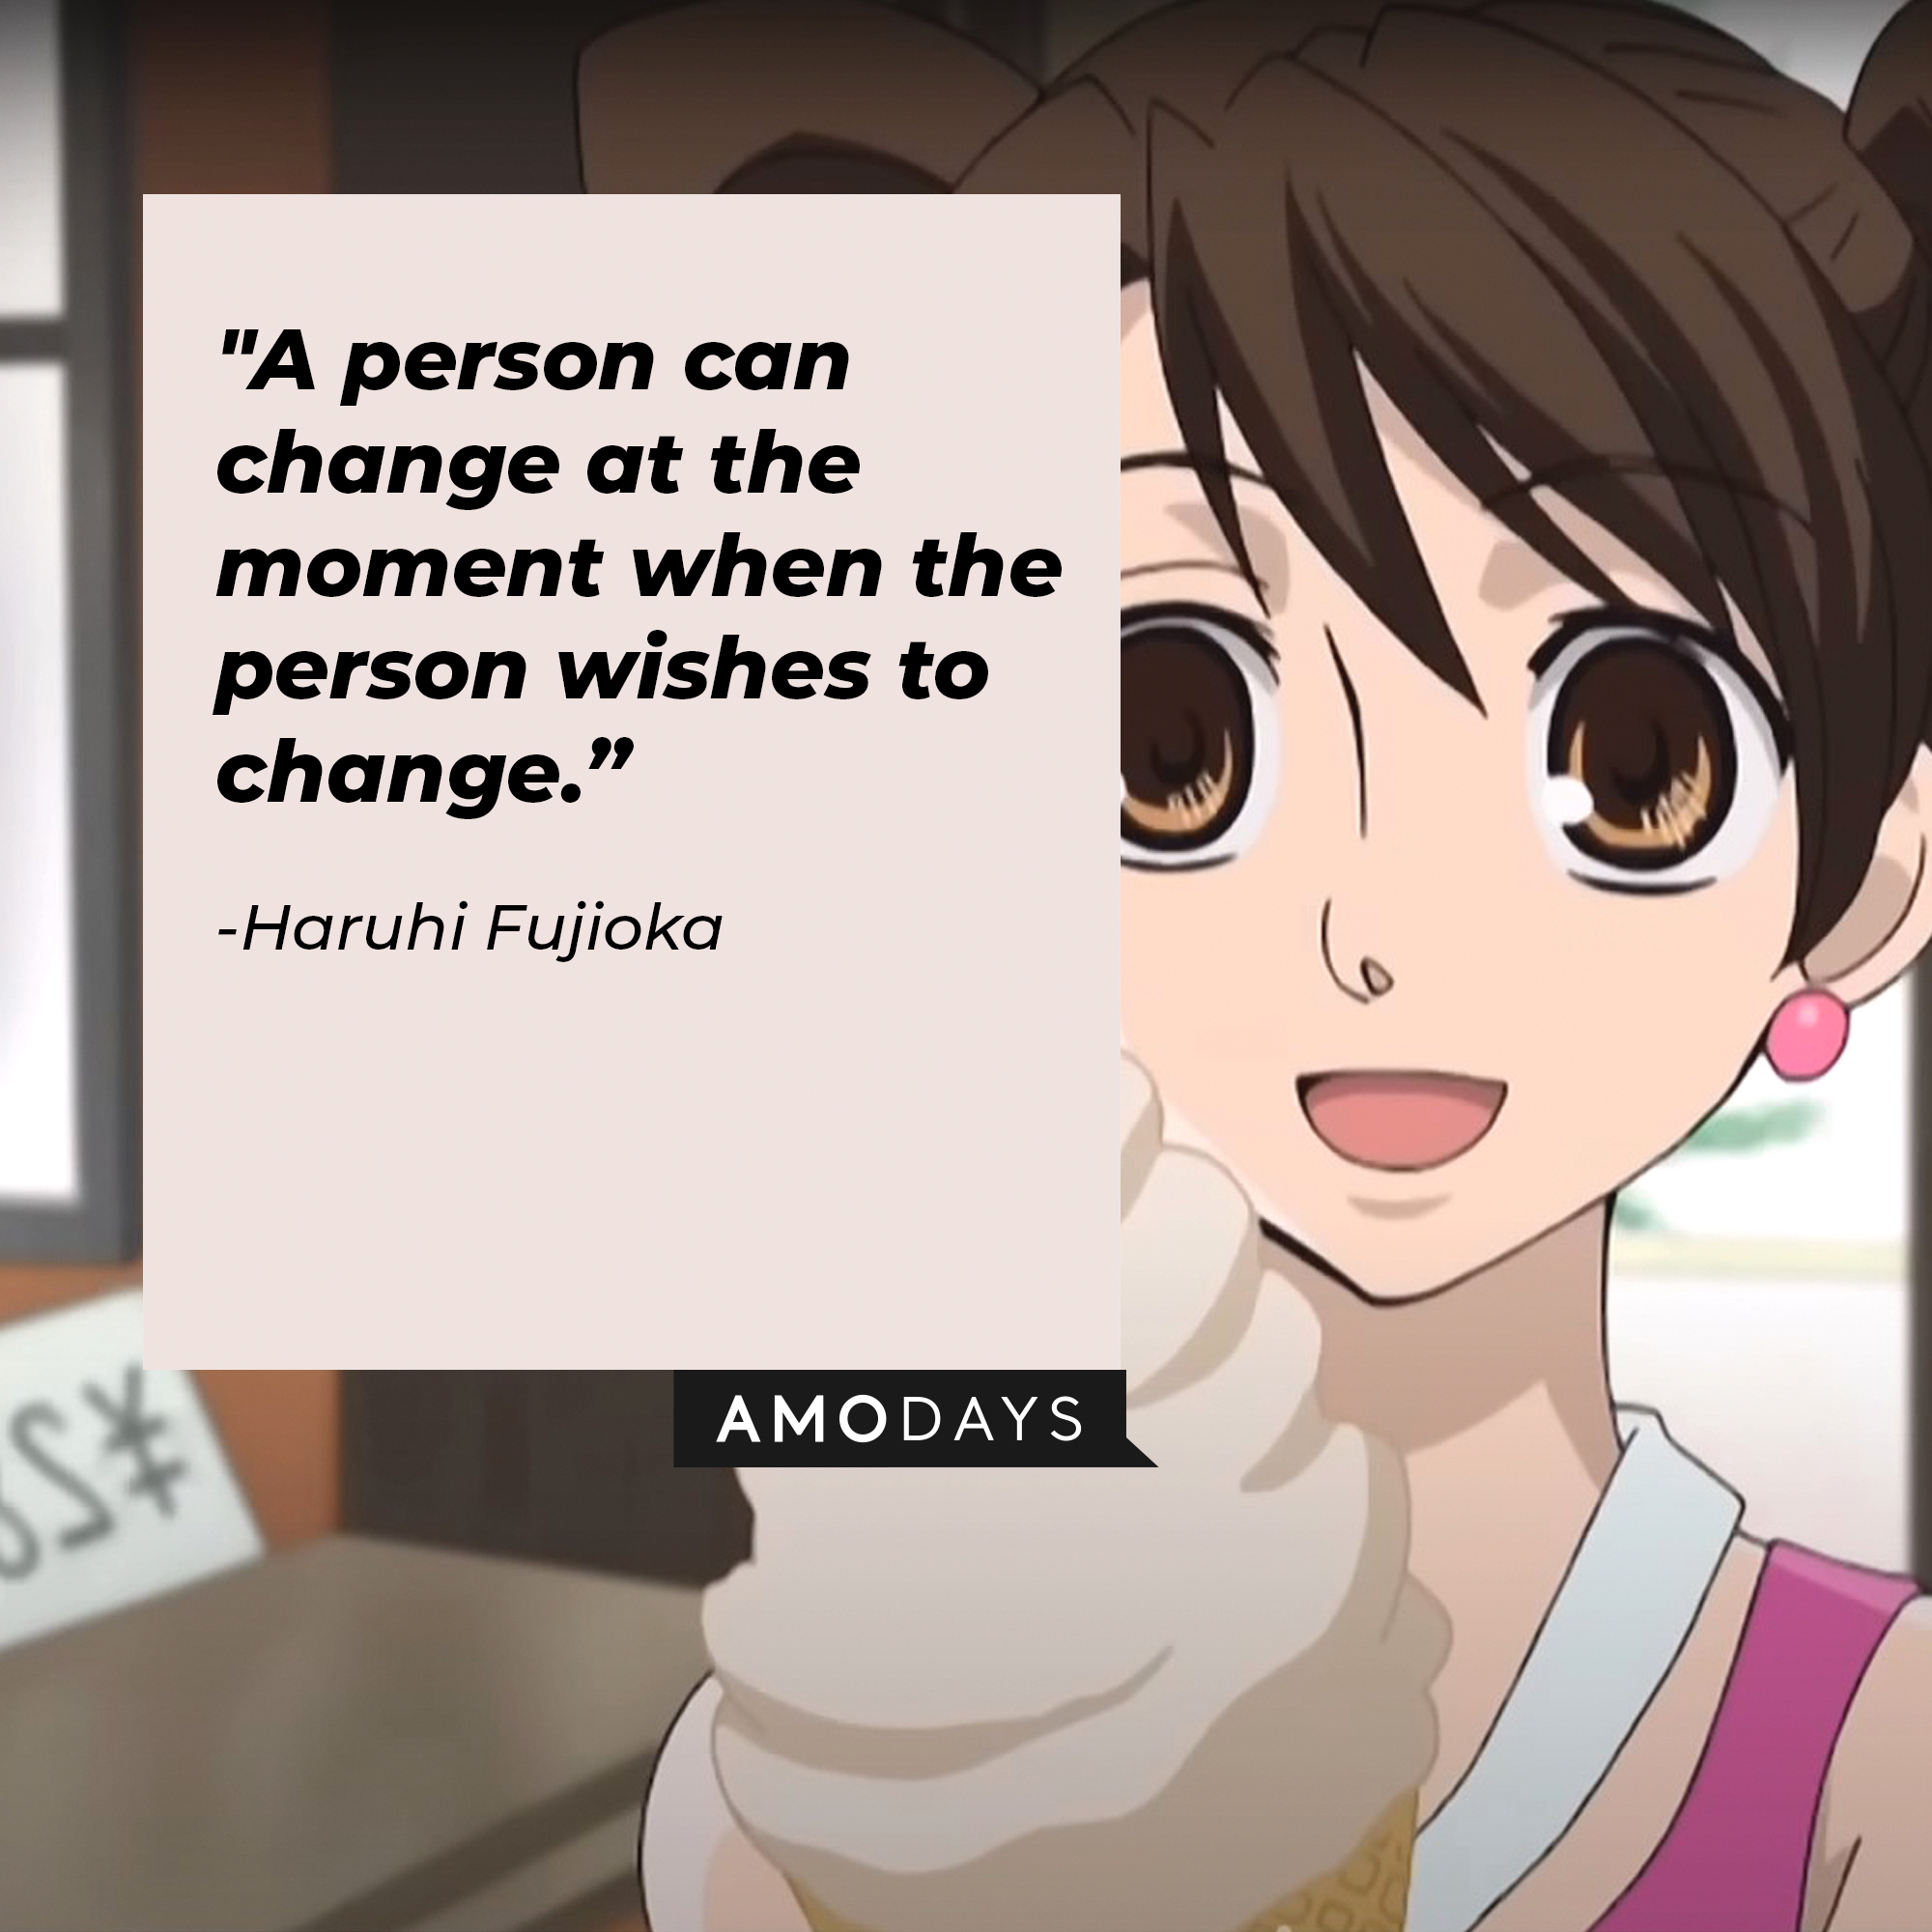 A picture of the anime character Haruhi Fujioka with a quote by her that reads, "A person can change at the moment when the person wishes to change.” | Image: facebook.com/theouranhostclub